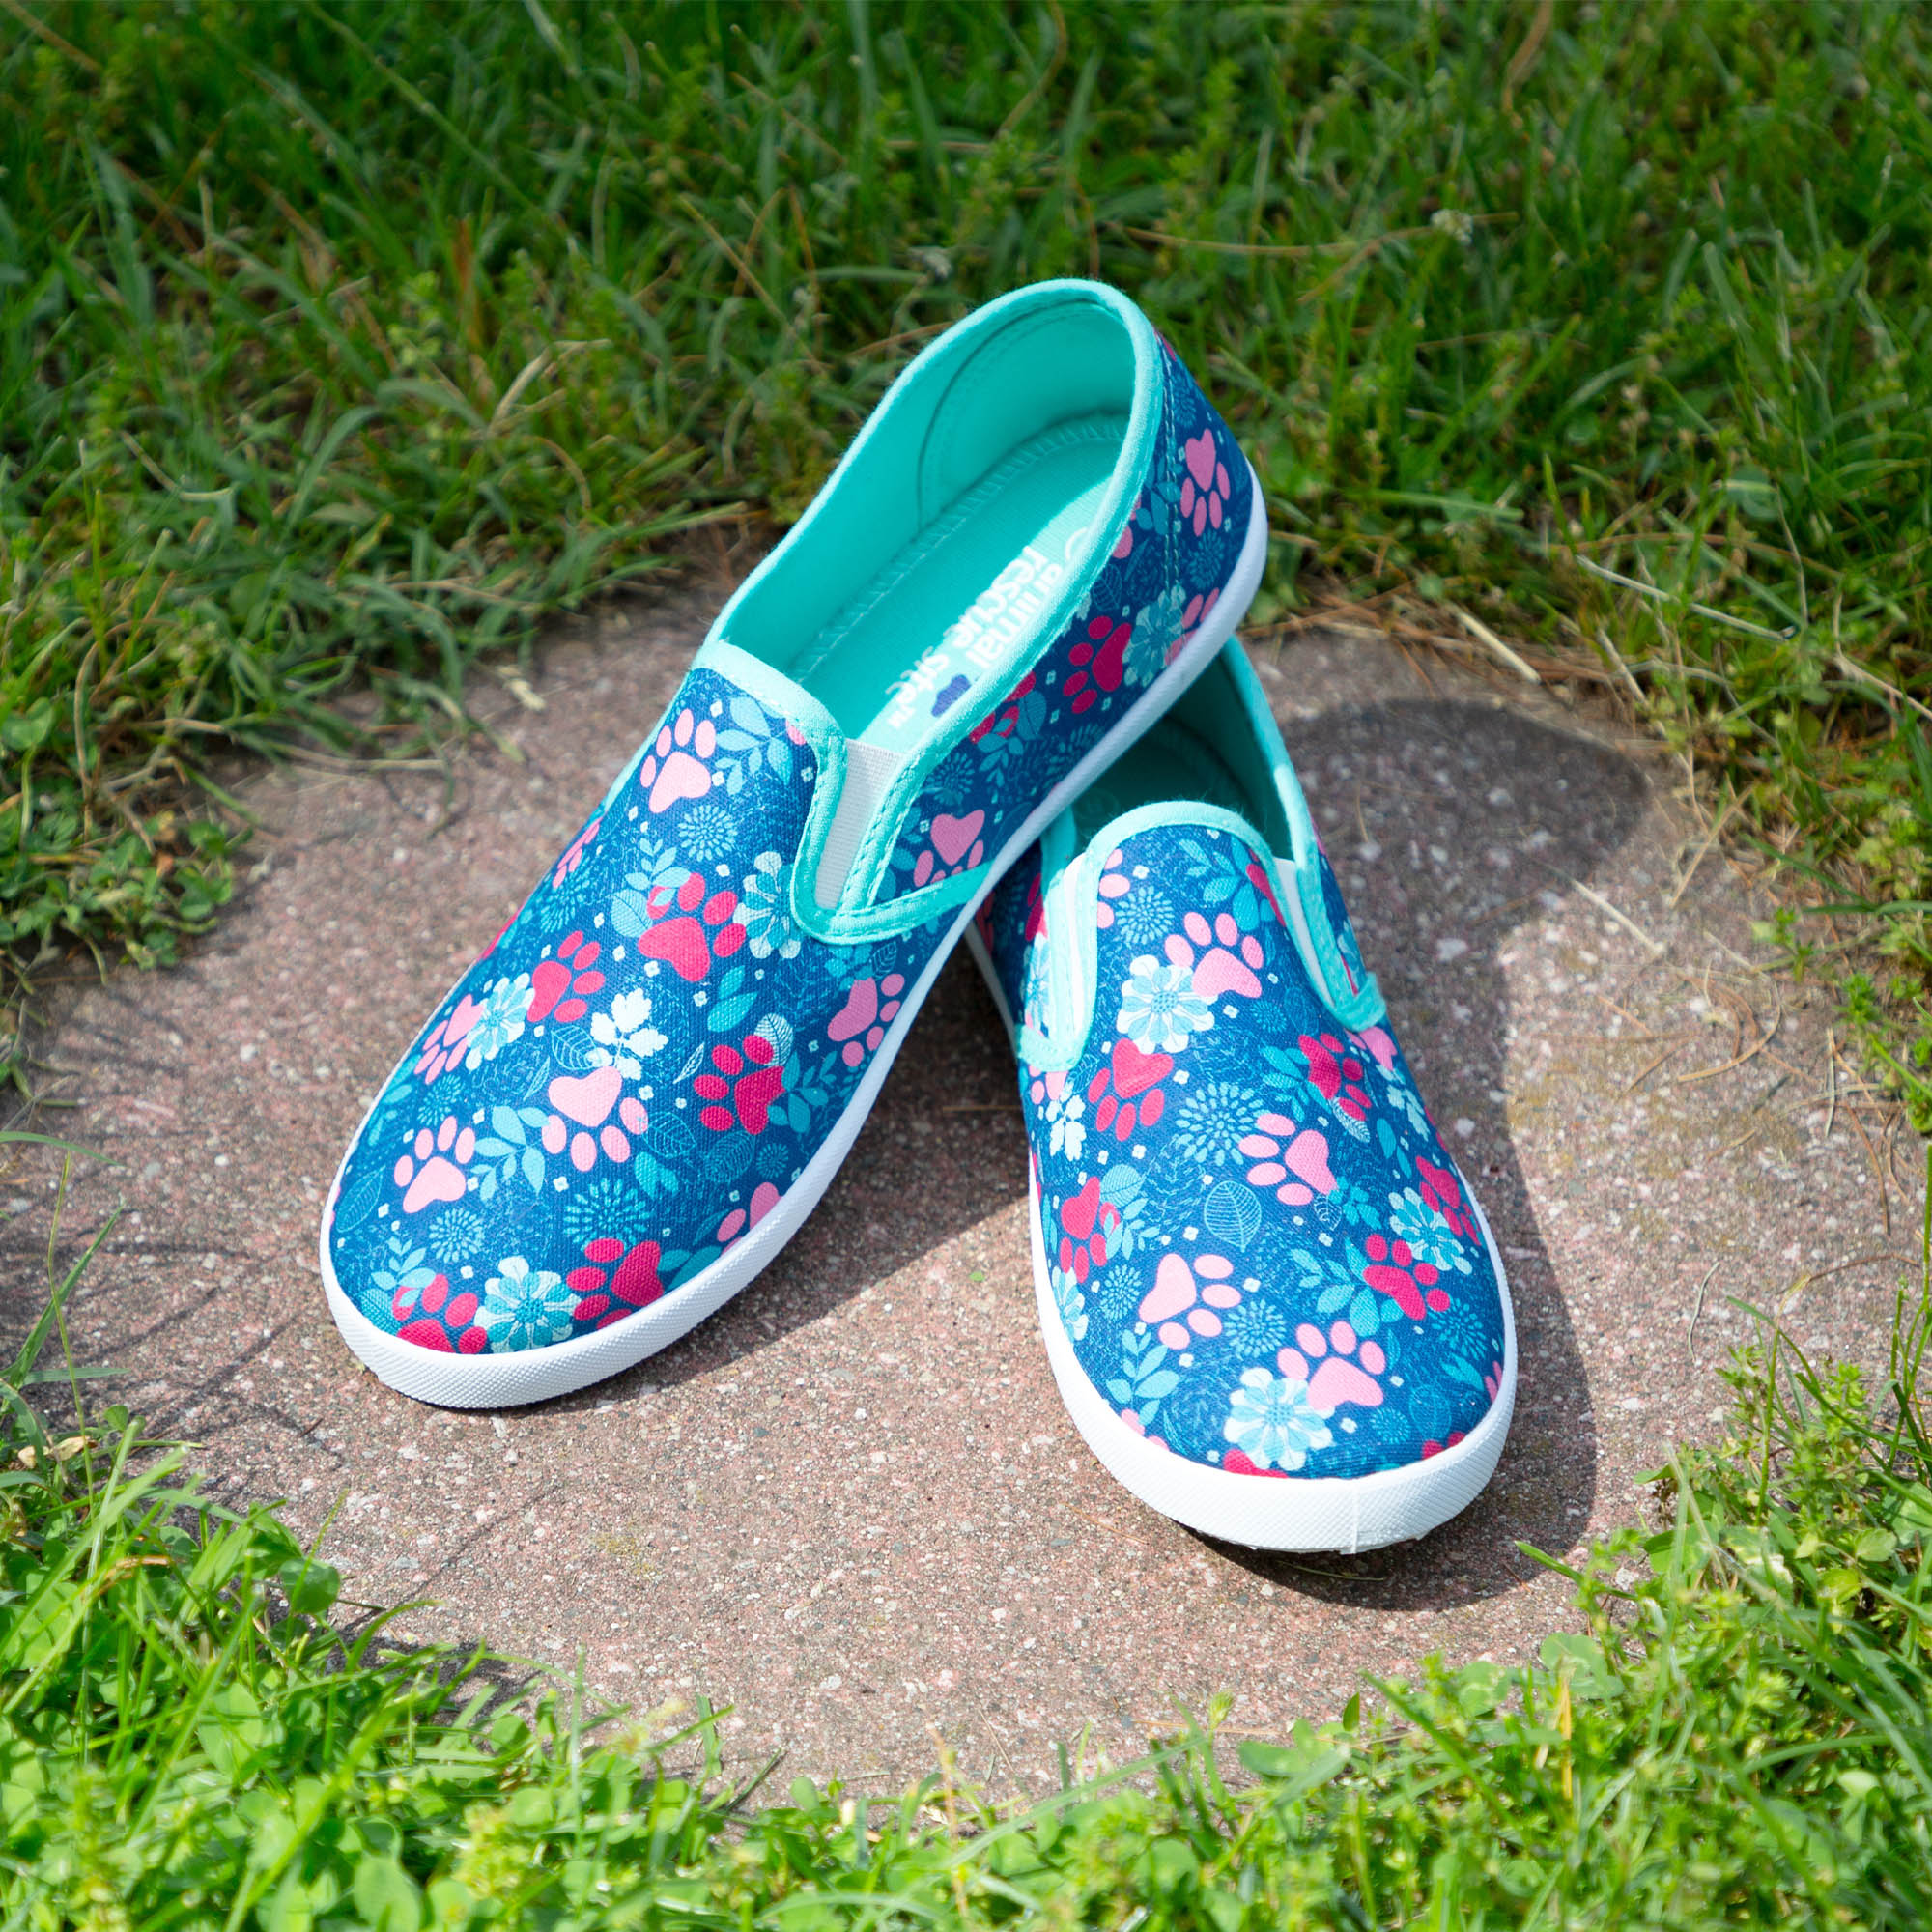 Women's Paw Print Slip On Canvas Shoes - Daisies & Paws - 11